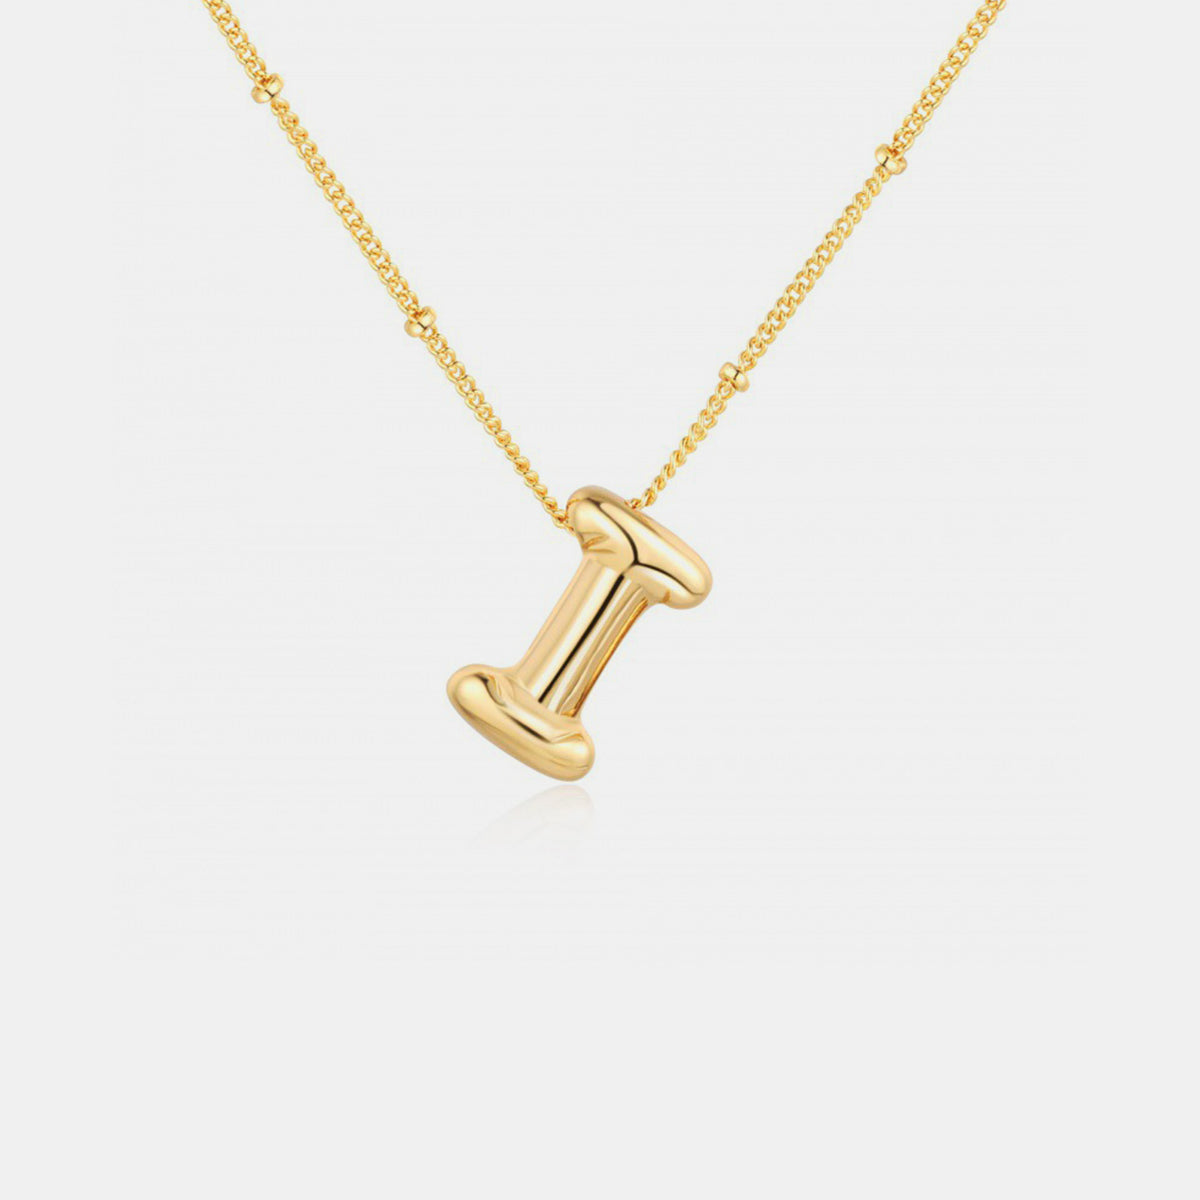 TEEK - A-J Gold-Plated Letter Necklace JEWELRY TEEK Trend Style I  